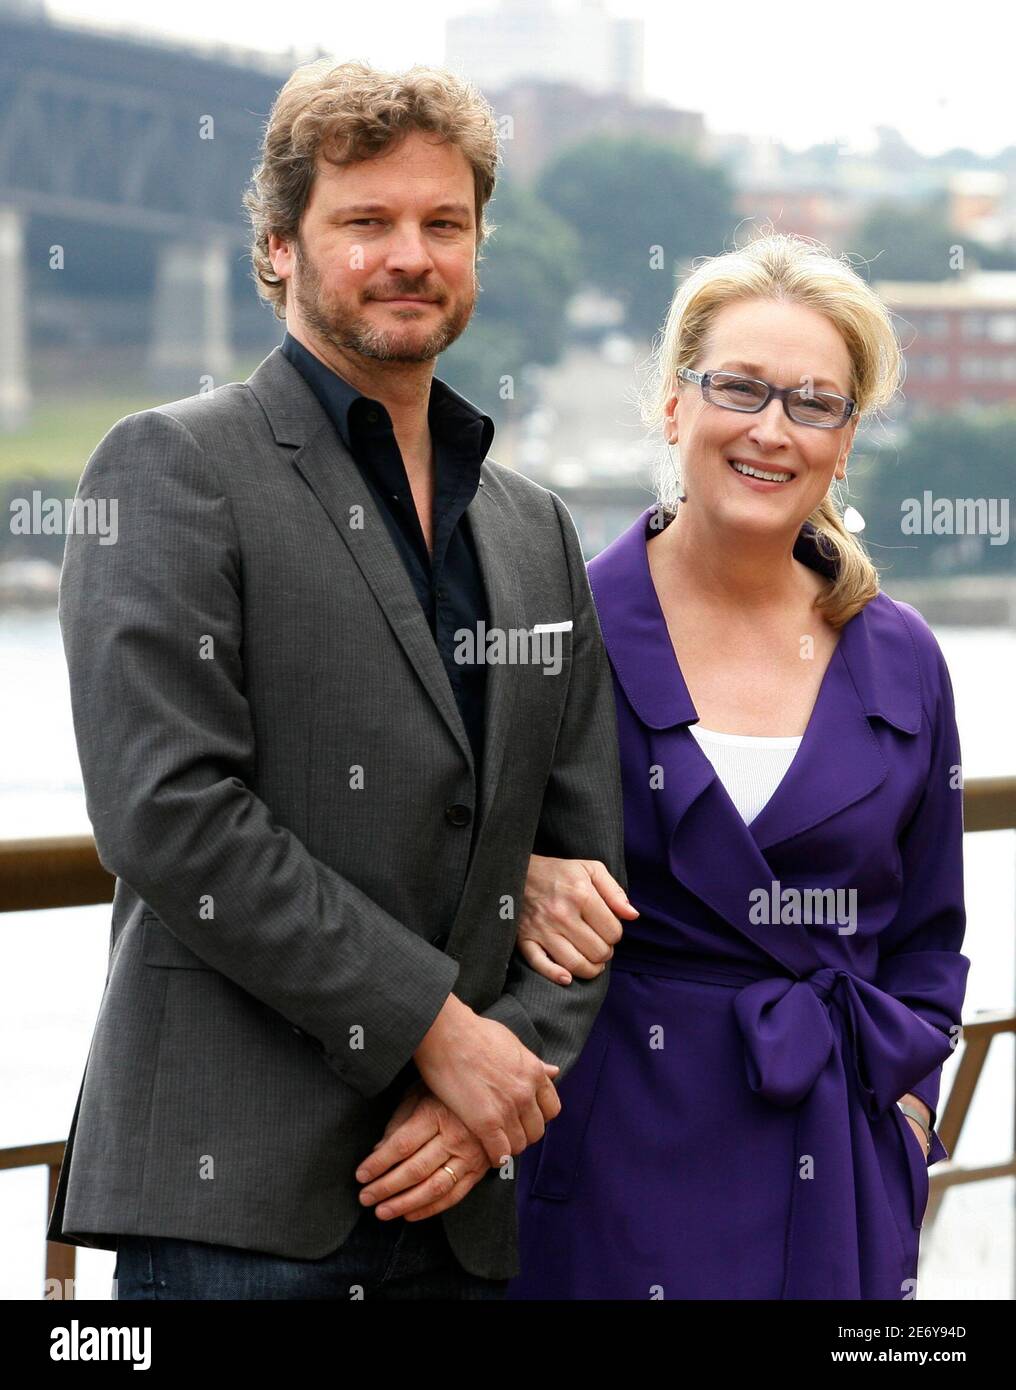 U.S. actress Meryl Streep poses with British actor Colin Firth during a  media call at Sydney Opera House July 8, 2008. The actors are in Australia  to promote the movie 